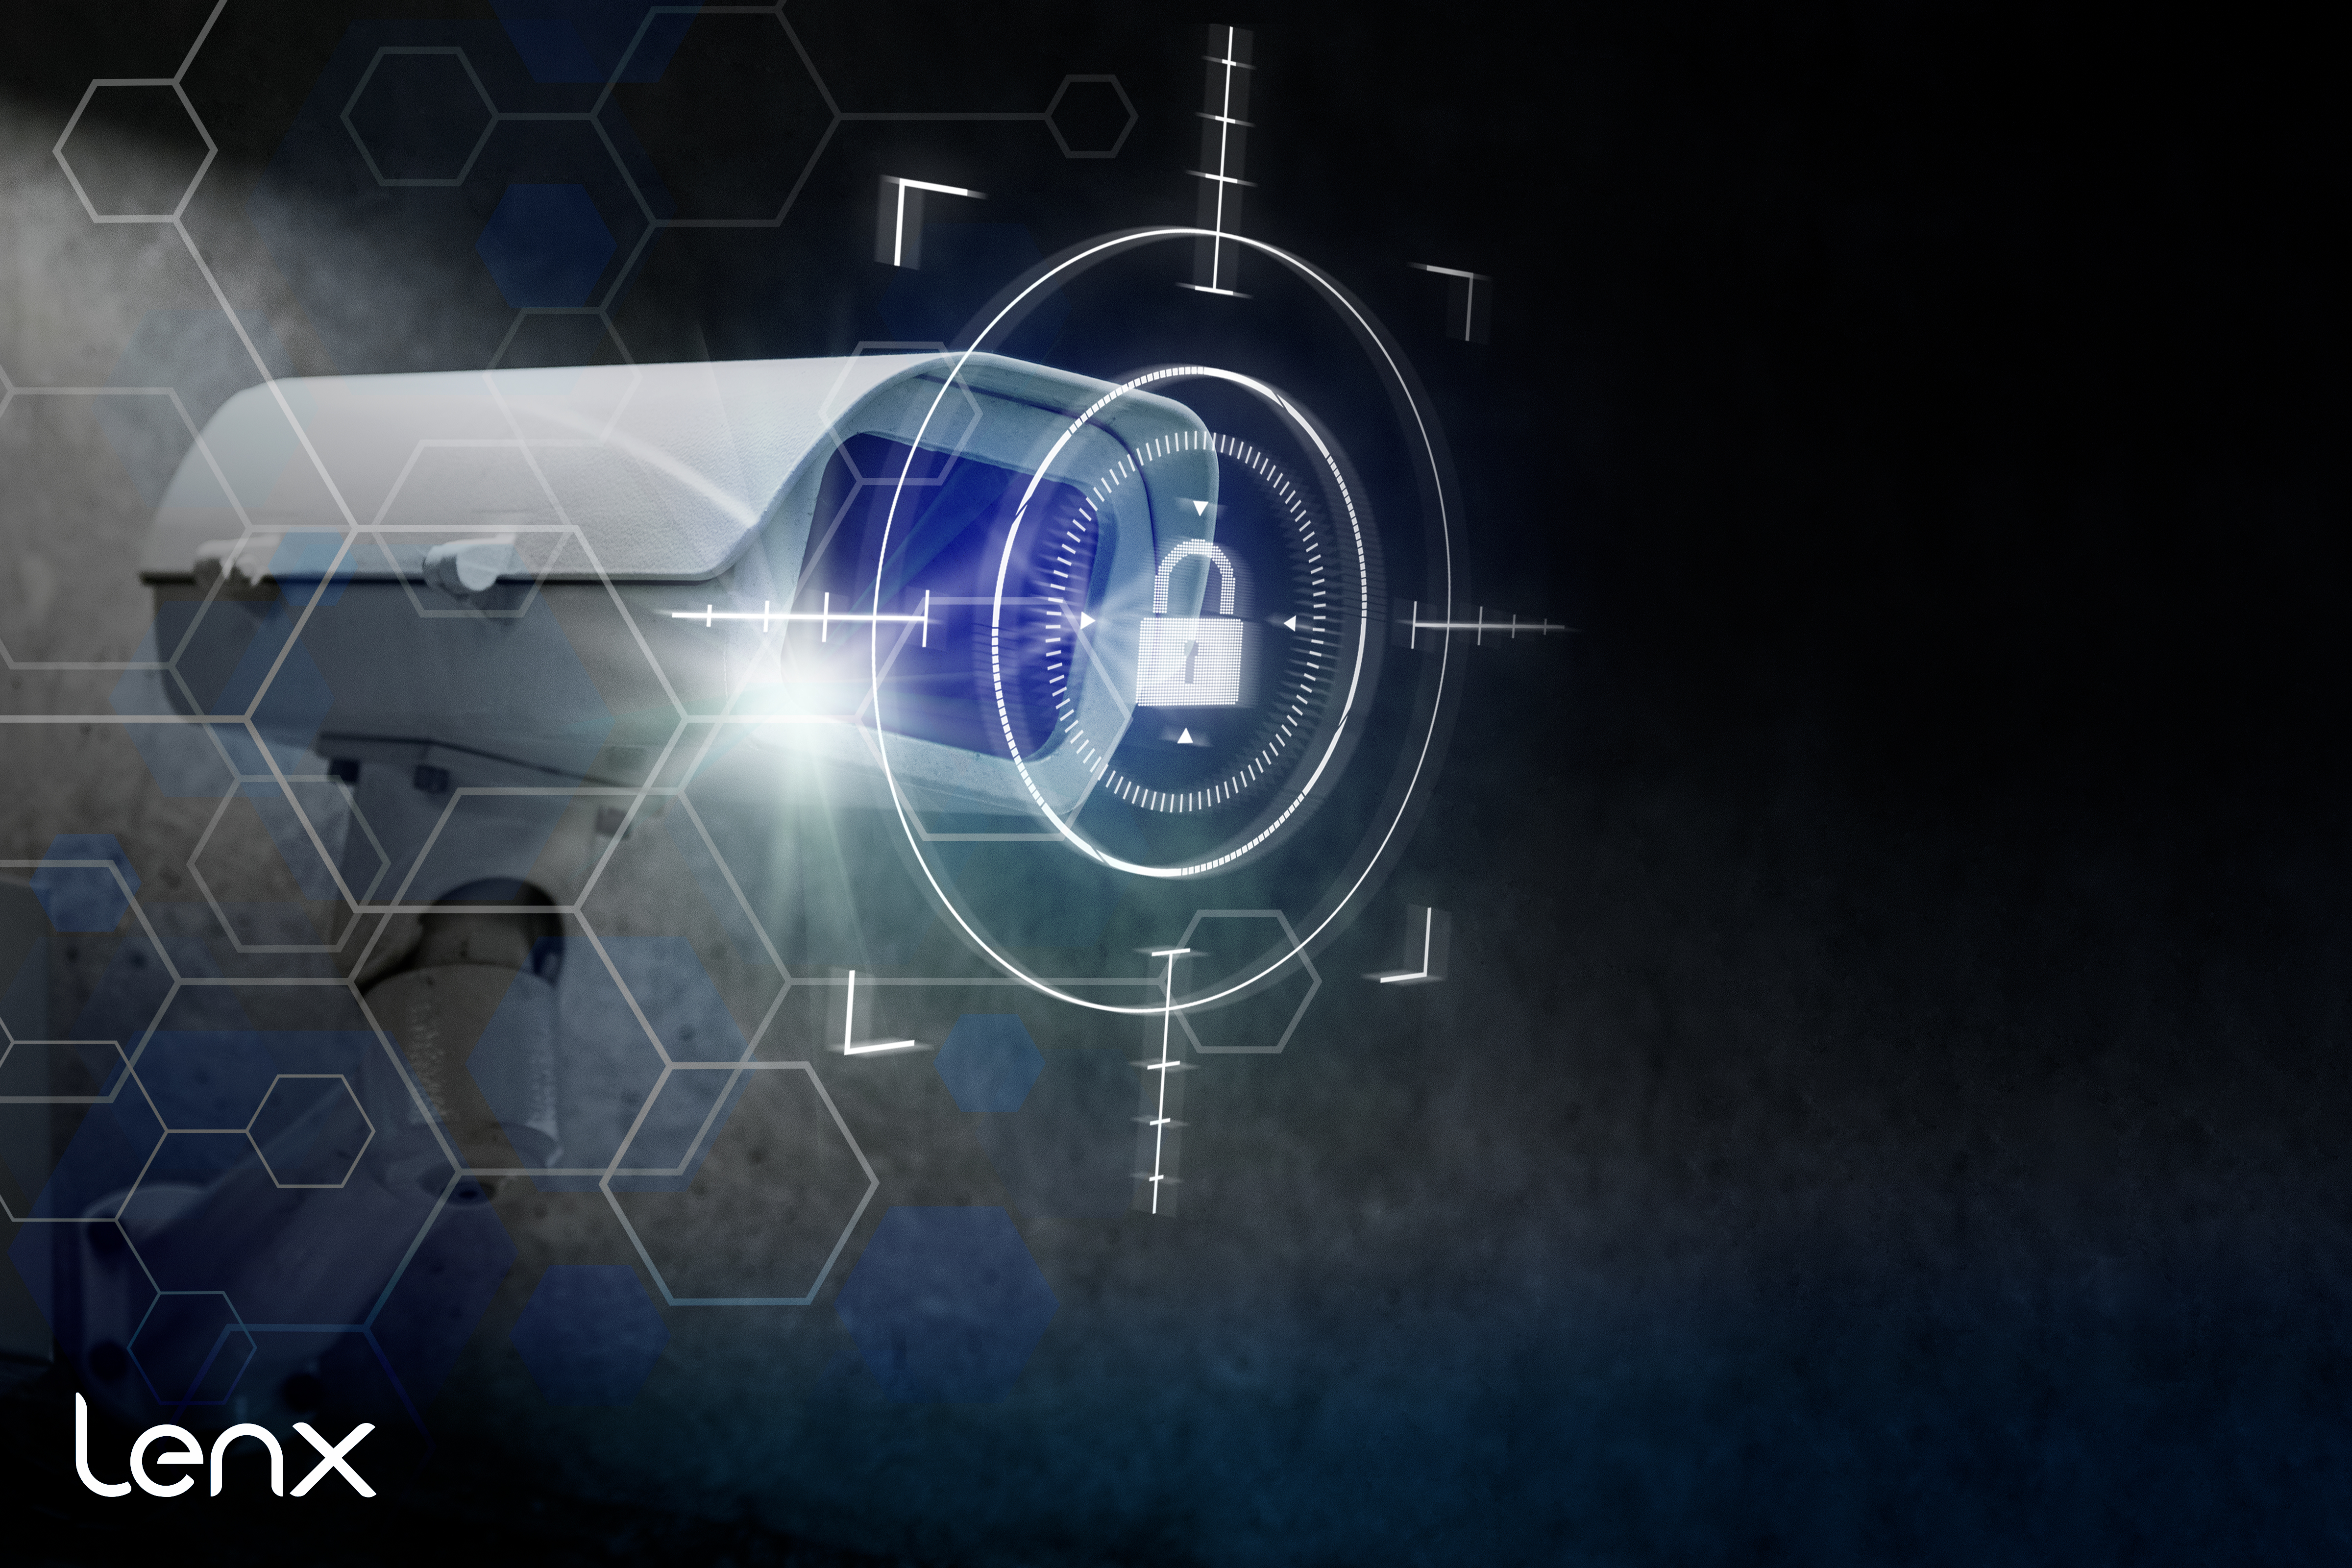 Machine Learning, AI Security, And Active Shooter Detection Systems